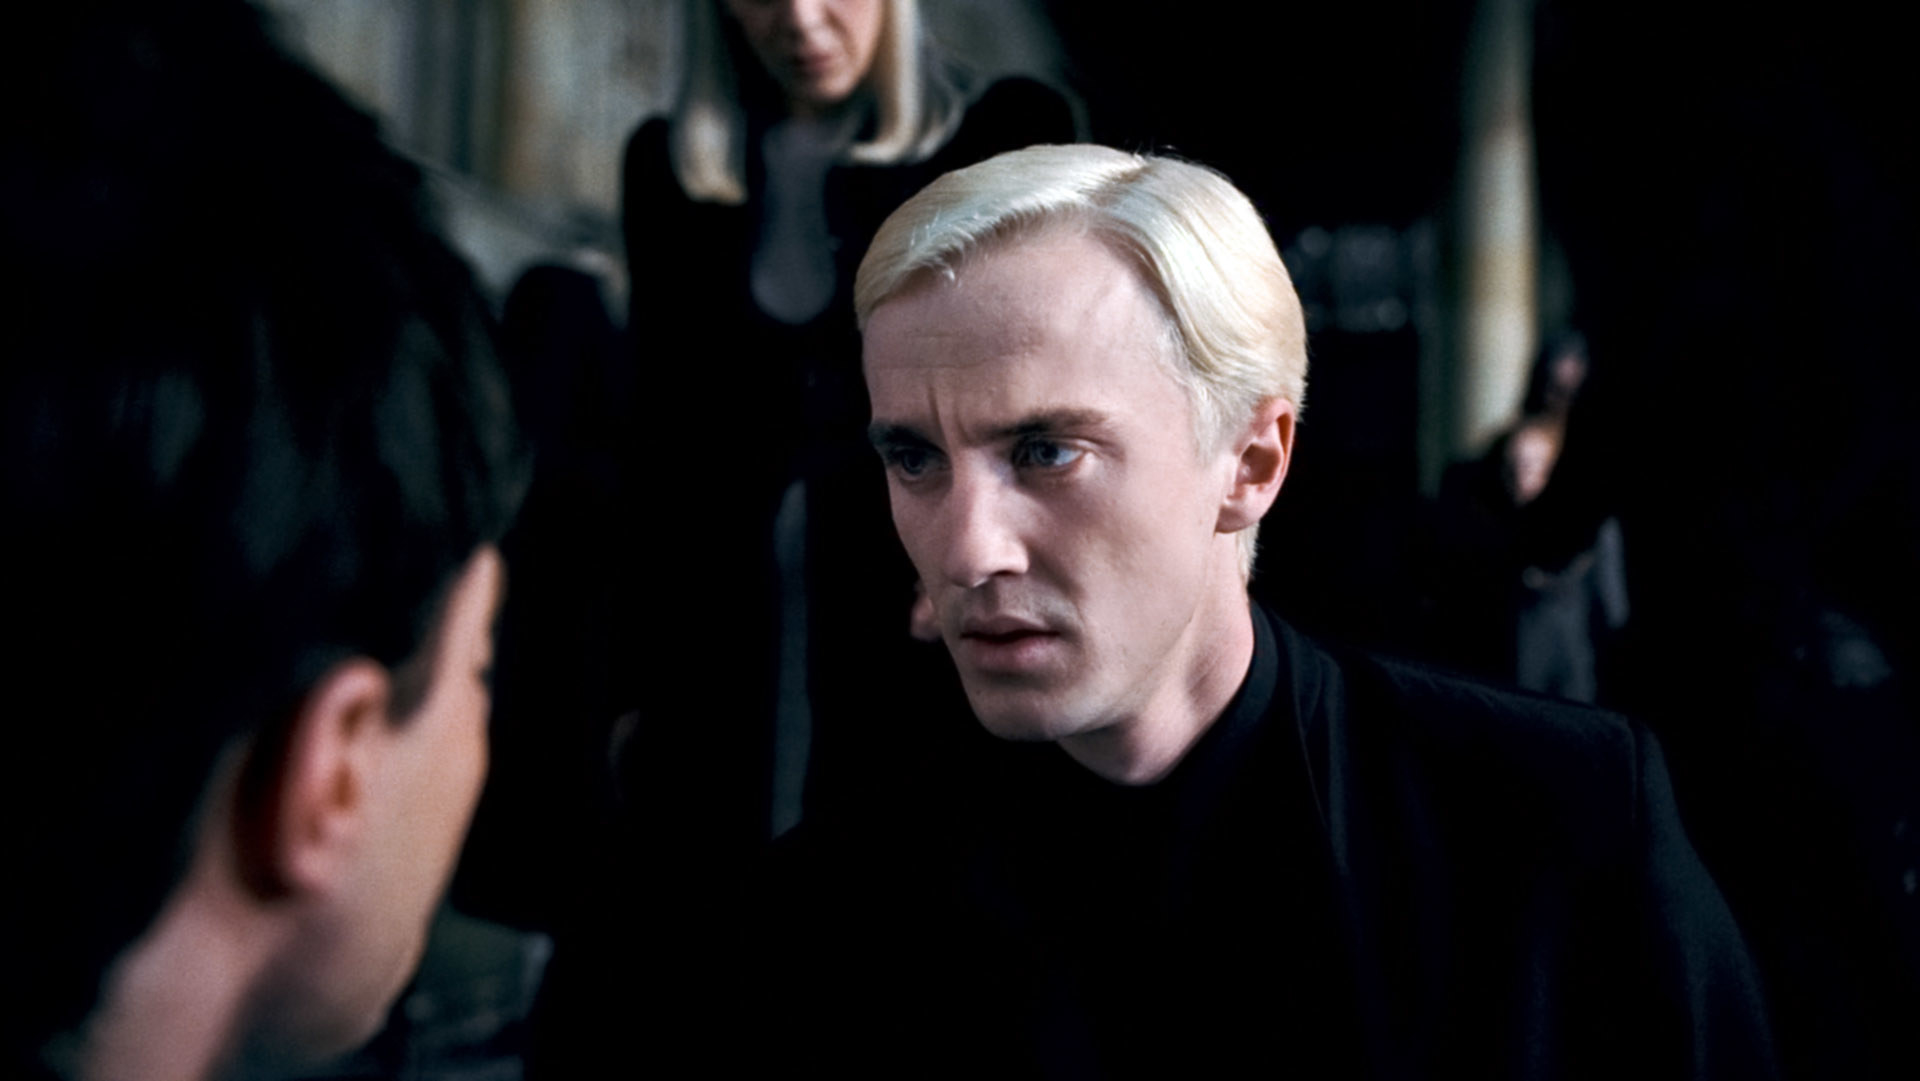 Drace with slicked-back blonde hair and a wand in his face